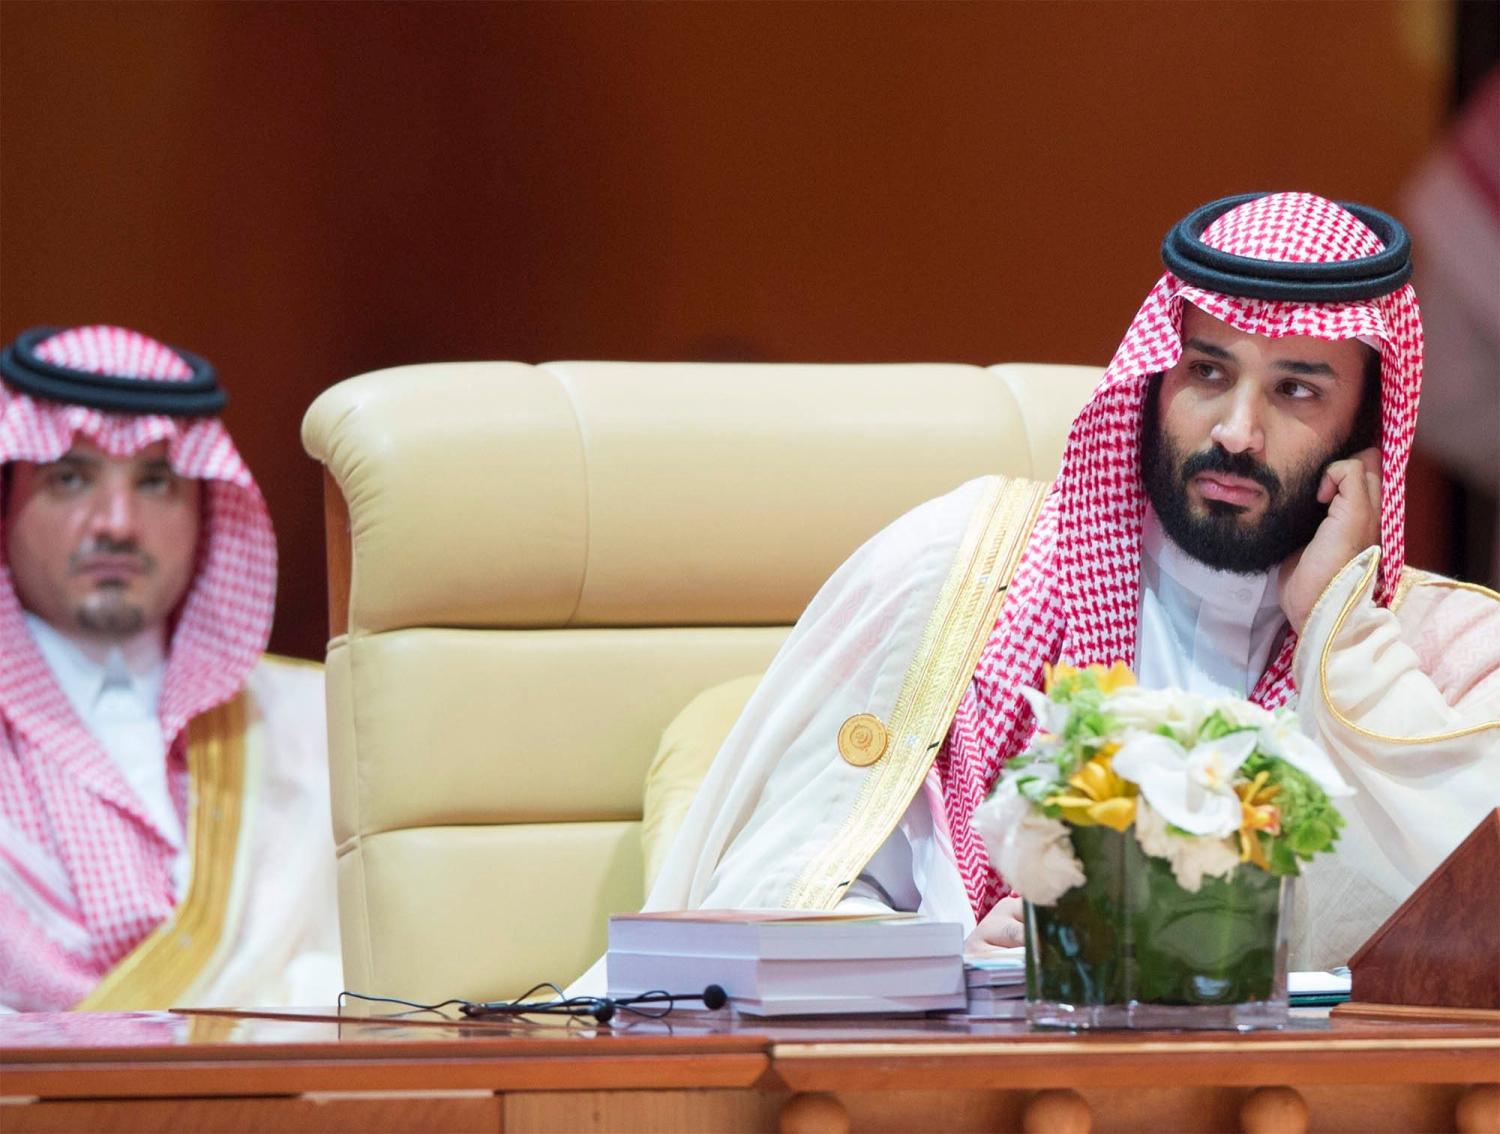 Saudi Arabia's Crown Prince Mohammed bin Salman attends during the 29th Arab Summit in Dhahran, Saudi Arabia April 15, 2018. Bandar Algaloud/Courtesy of Saudi Royal Court/Handout via REUTERS THIS IMAGE HAS BEEN SUPPLIED BY A THIRD PARTY. - RC162FAFE140